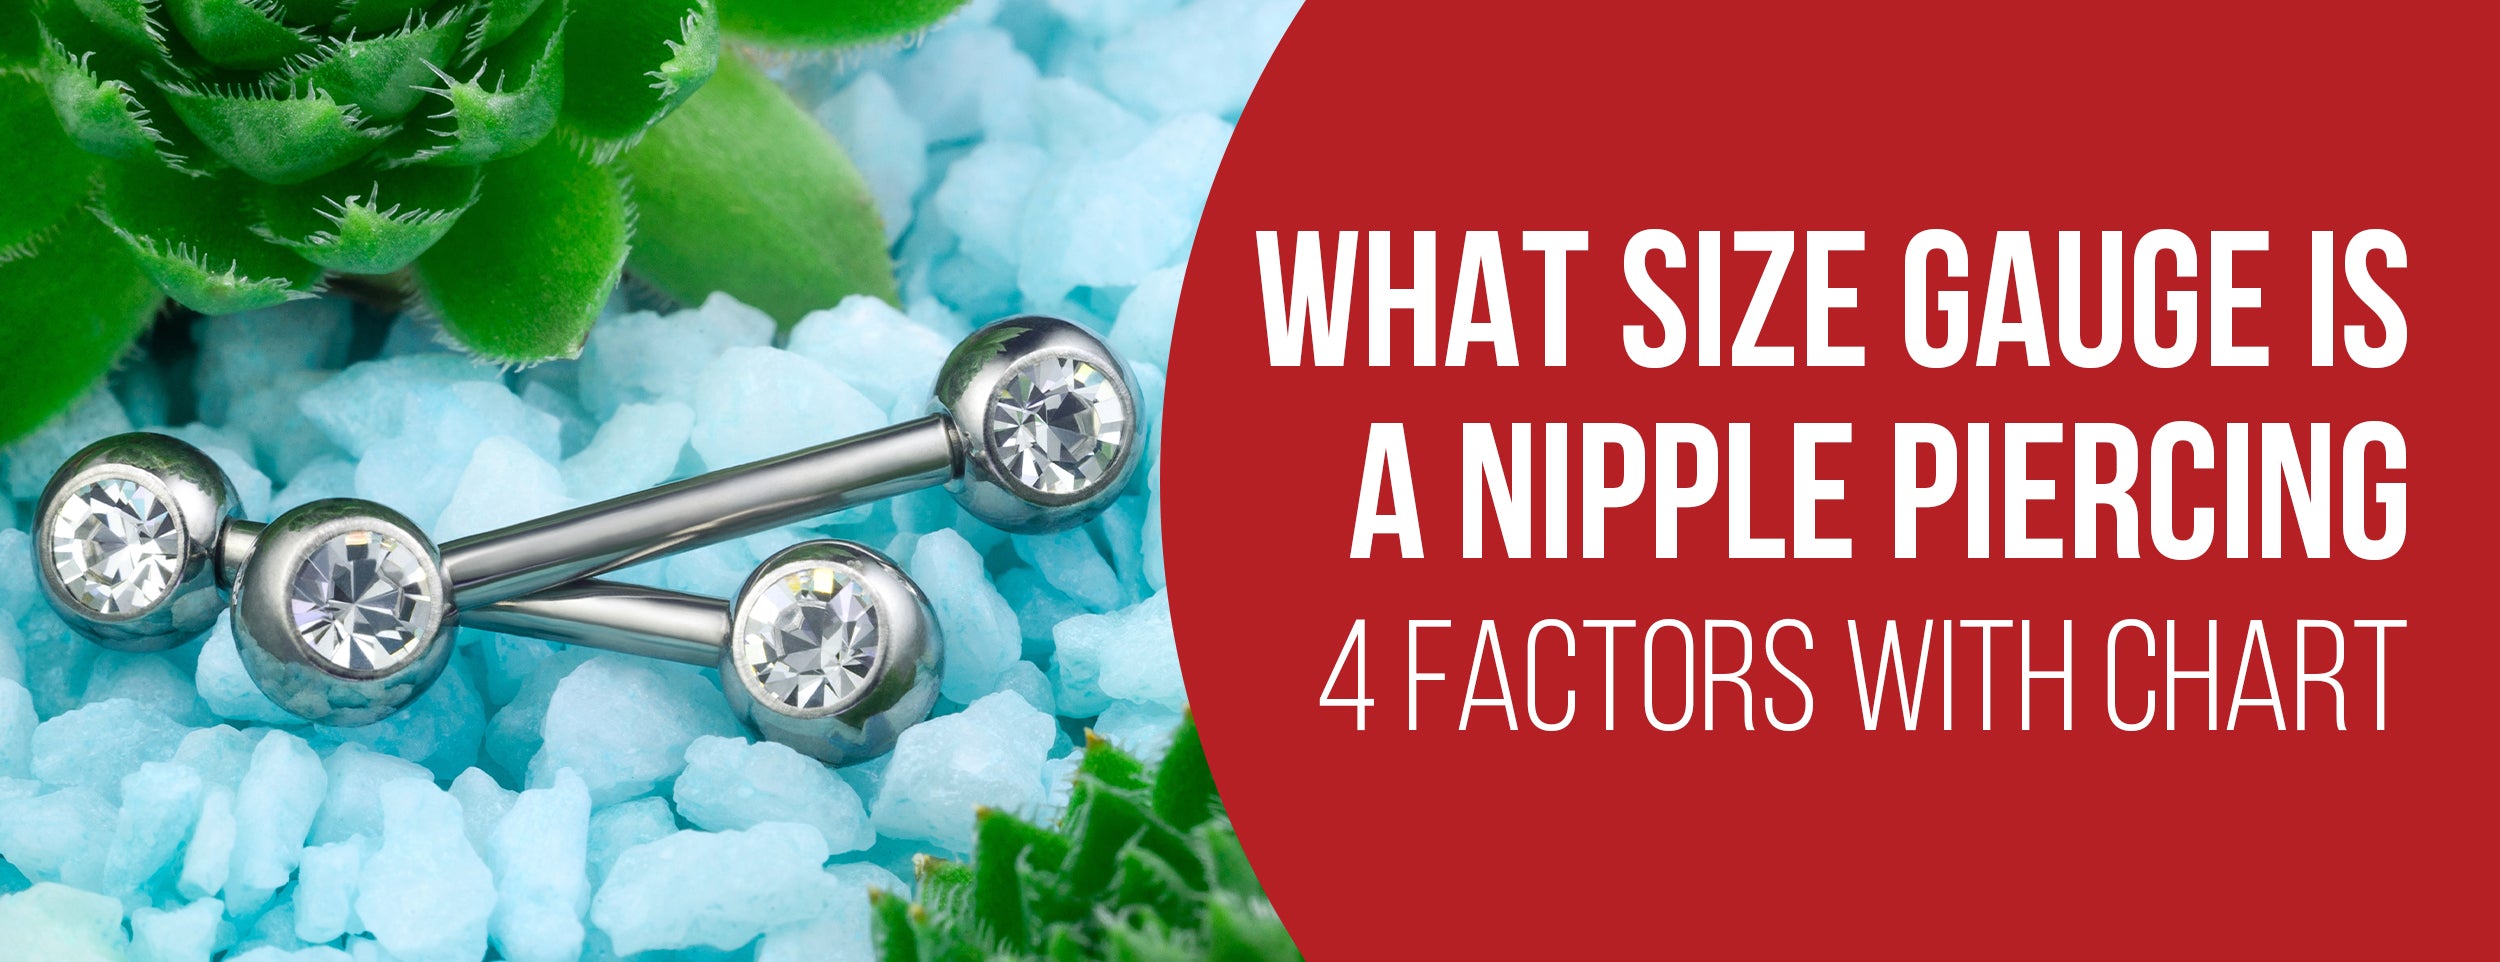 What Size Gauge Is a Nipple Piercing: 4 Factors [With Chart]